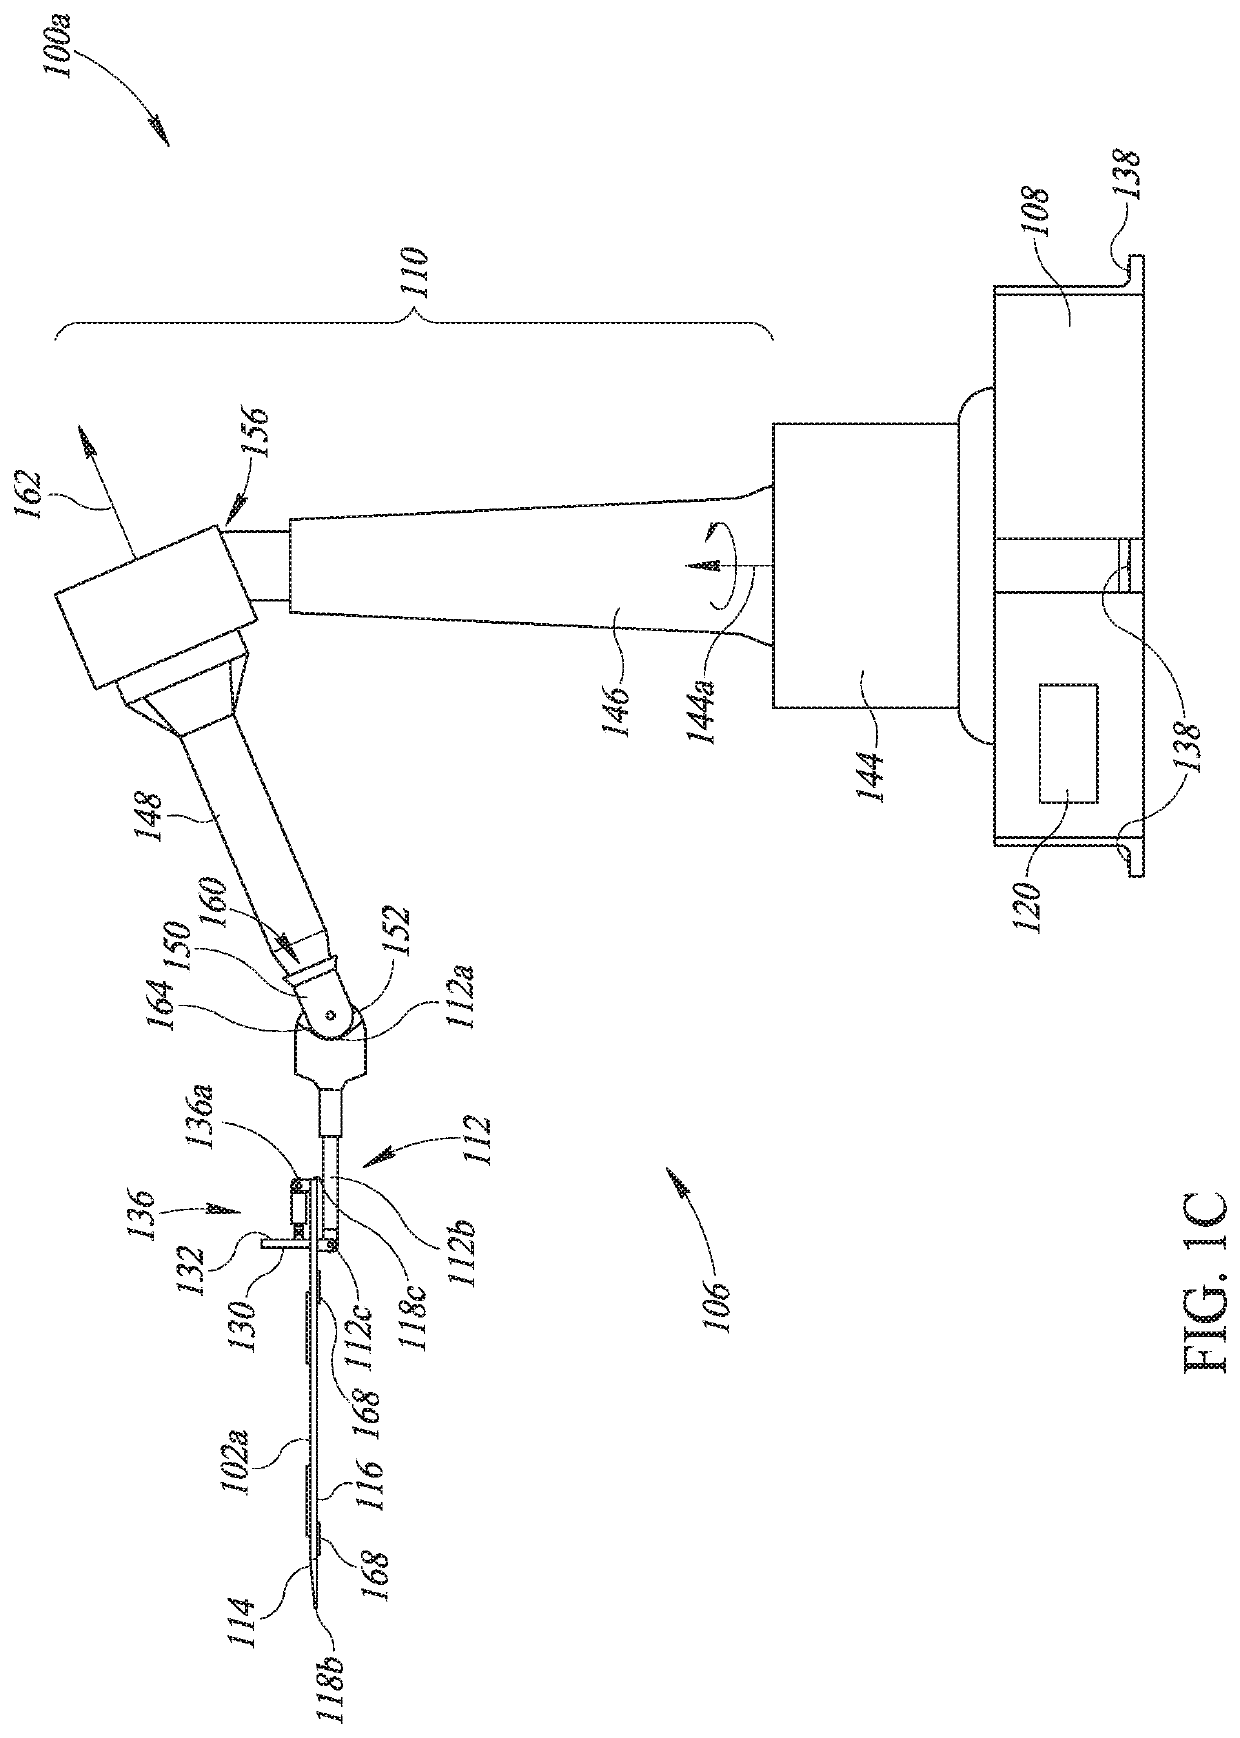 On-demand robotic food assembly equipment, and related systems and methods